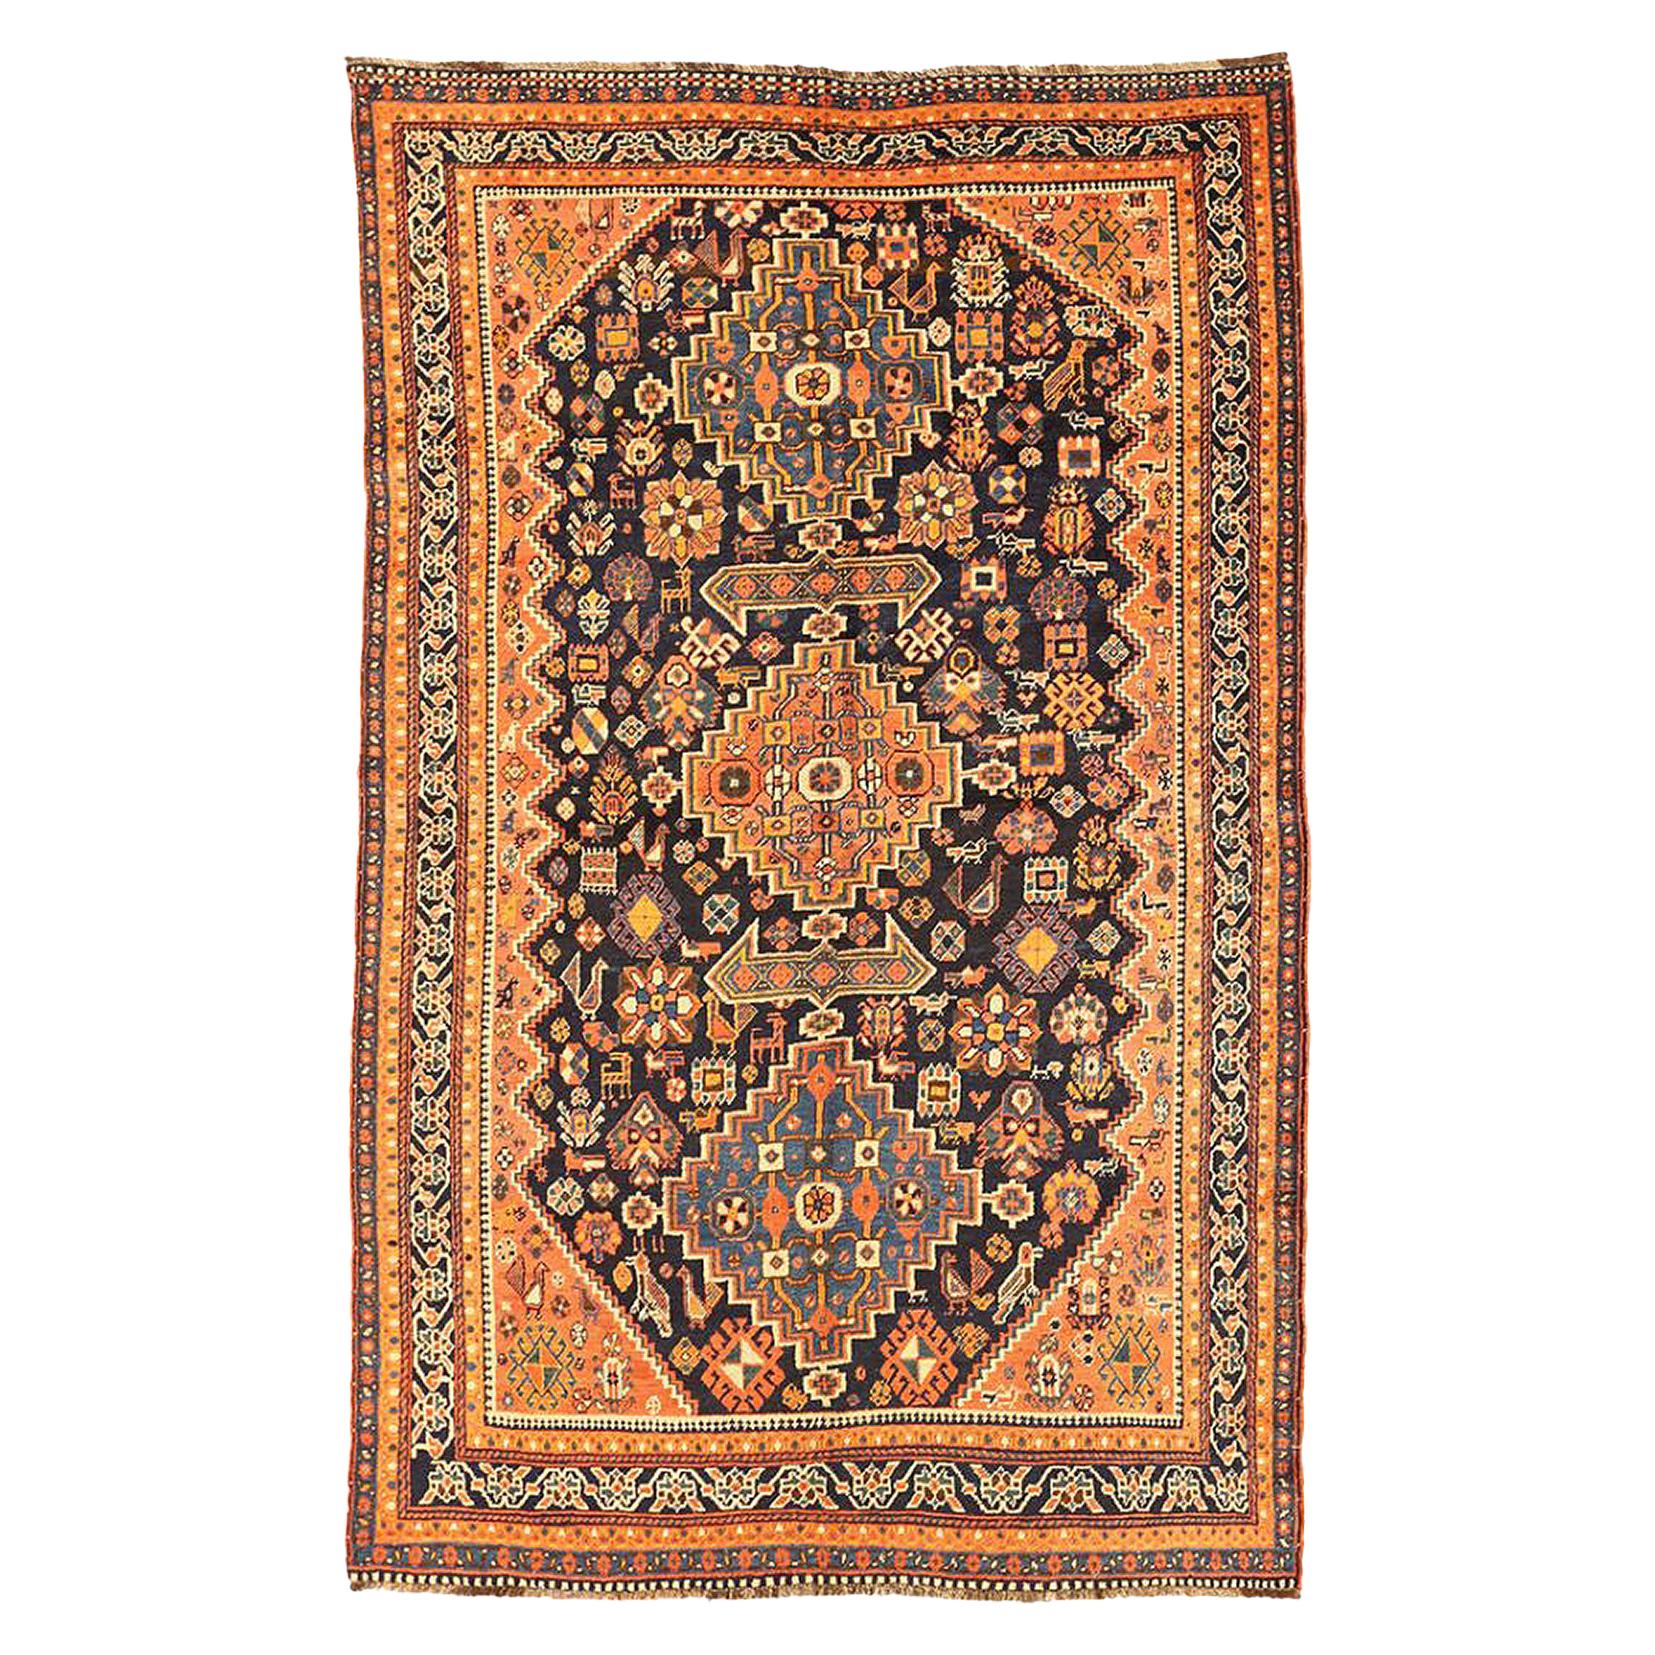 Antique Persian Shiraz Rug with Floral and Geometric Medallions Allover